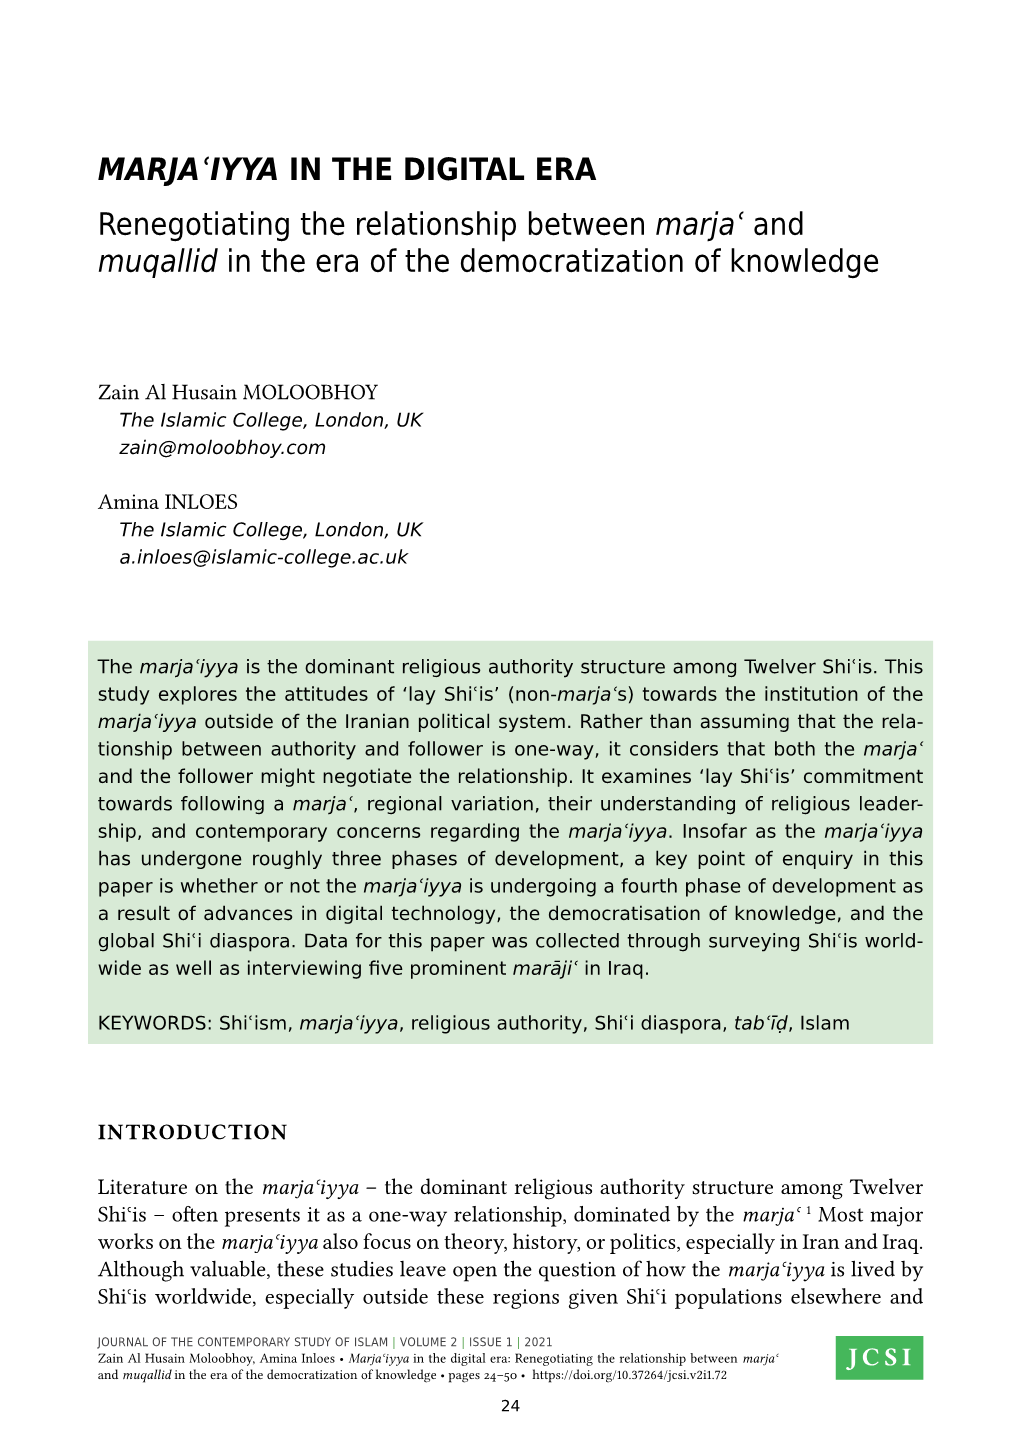 Marjaʿiyya in the Digital Era Renegotiating the Relationship Between Marjaʿ and Muqallid in the Era of the Democratization of Knowledge